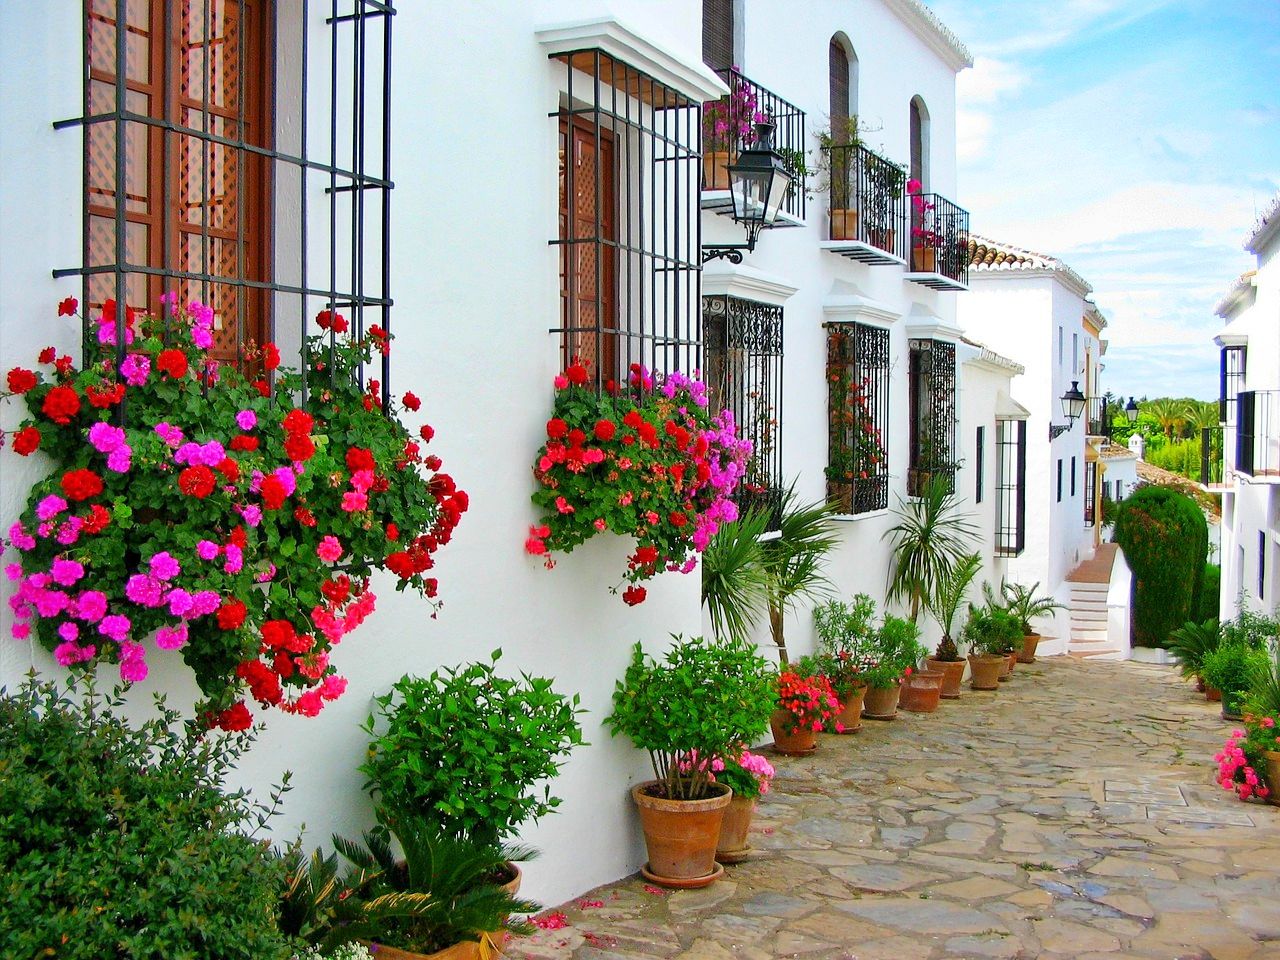 Old Town Marbella on the Costa del Sol in Spain